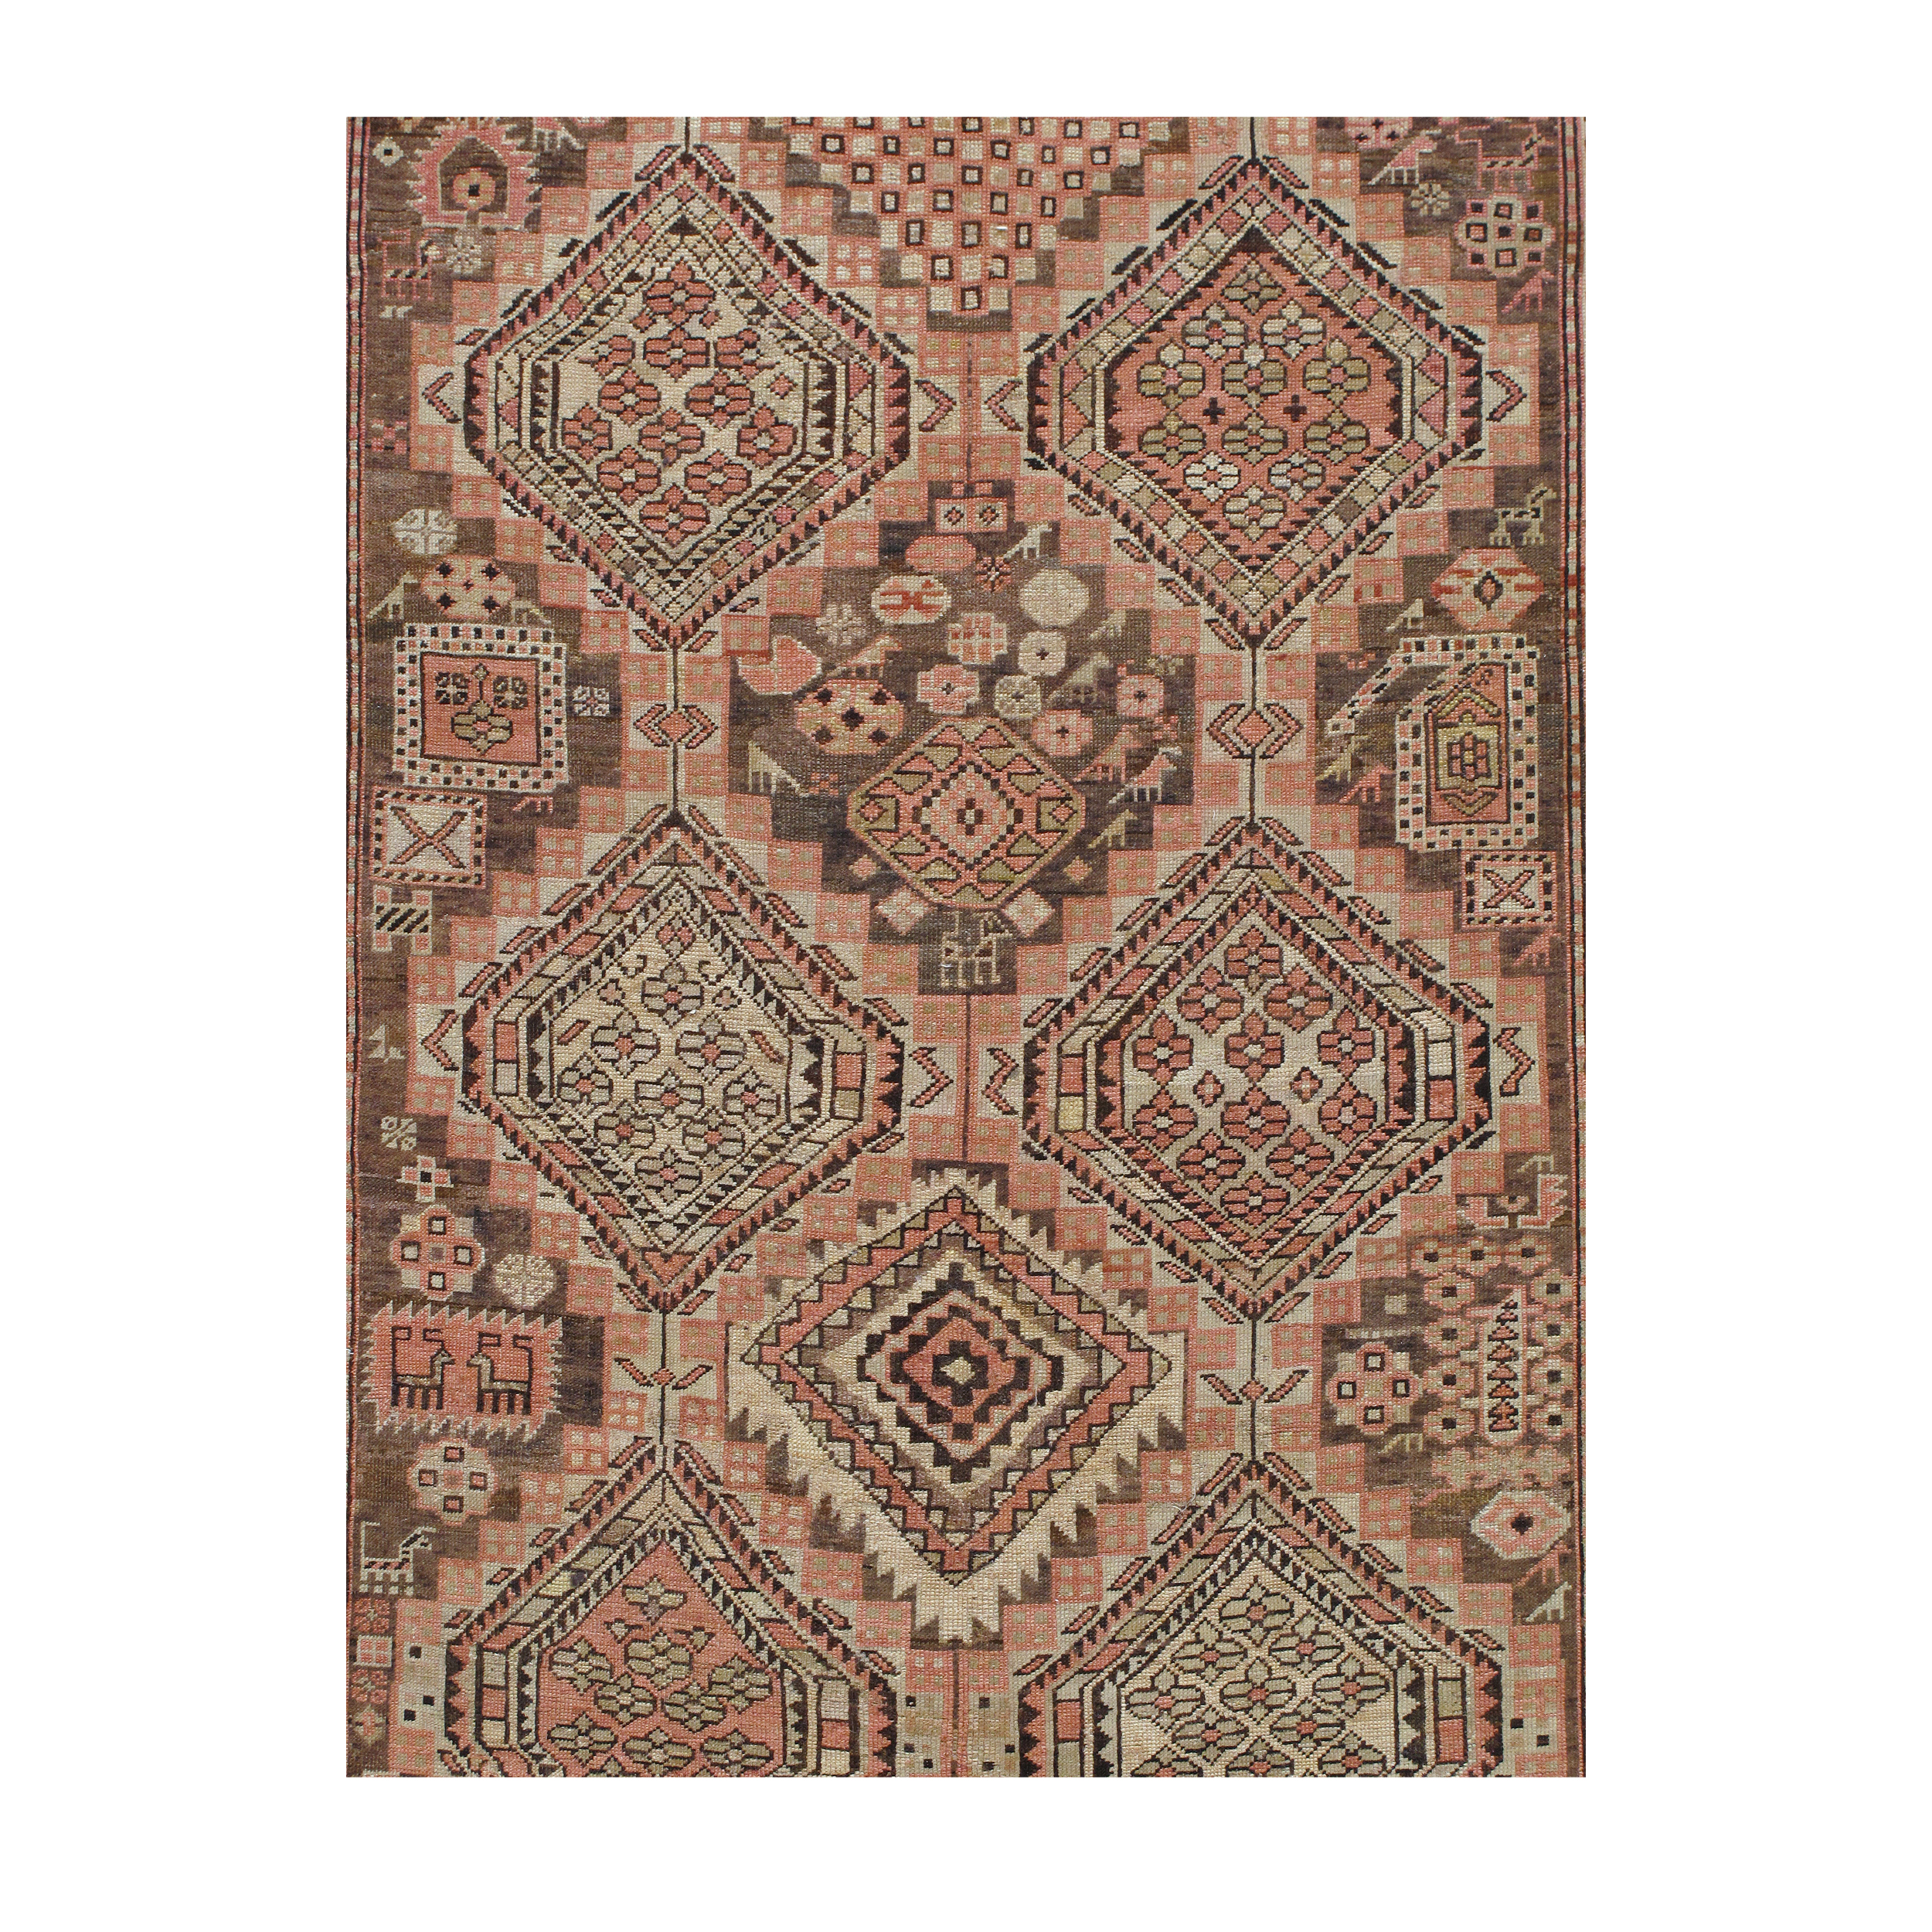 Shirvan is an antique Caucasian tribal rug from Azerbaijan, featuring a repeated articulated geometric pattern. 